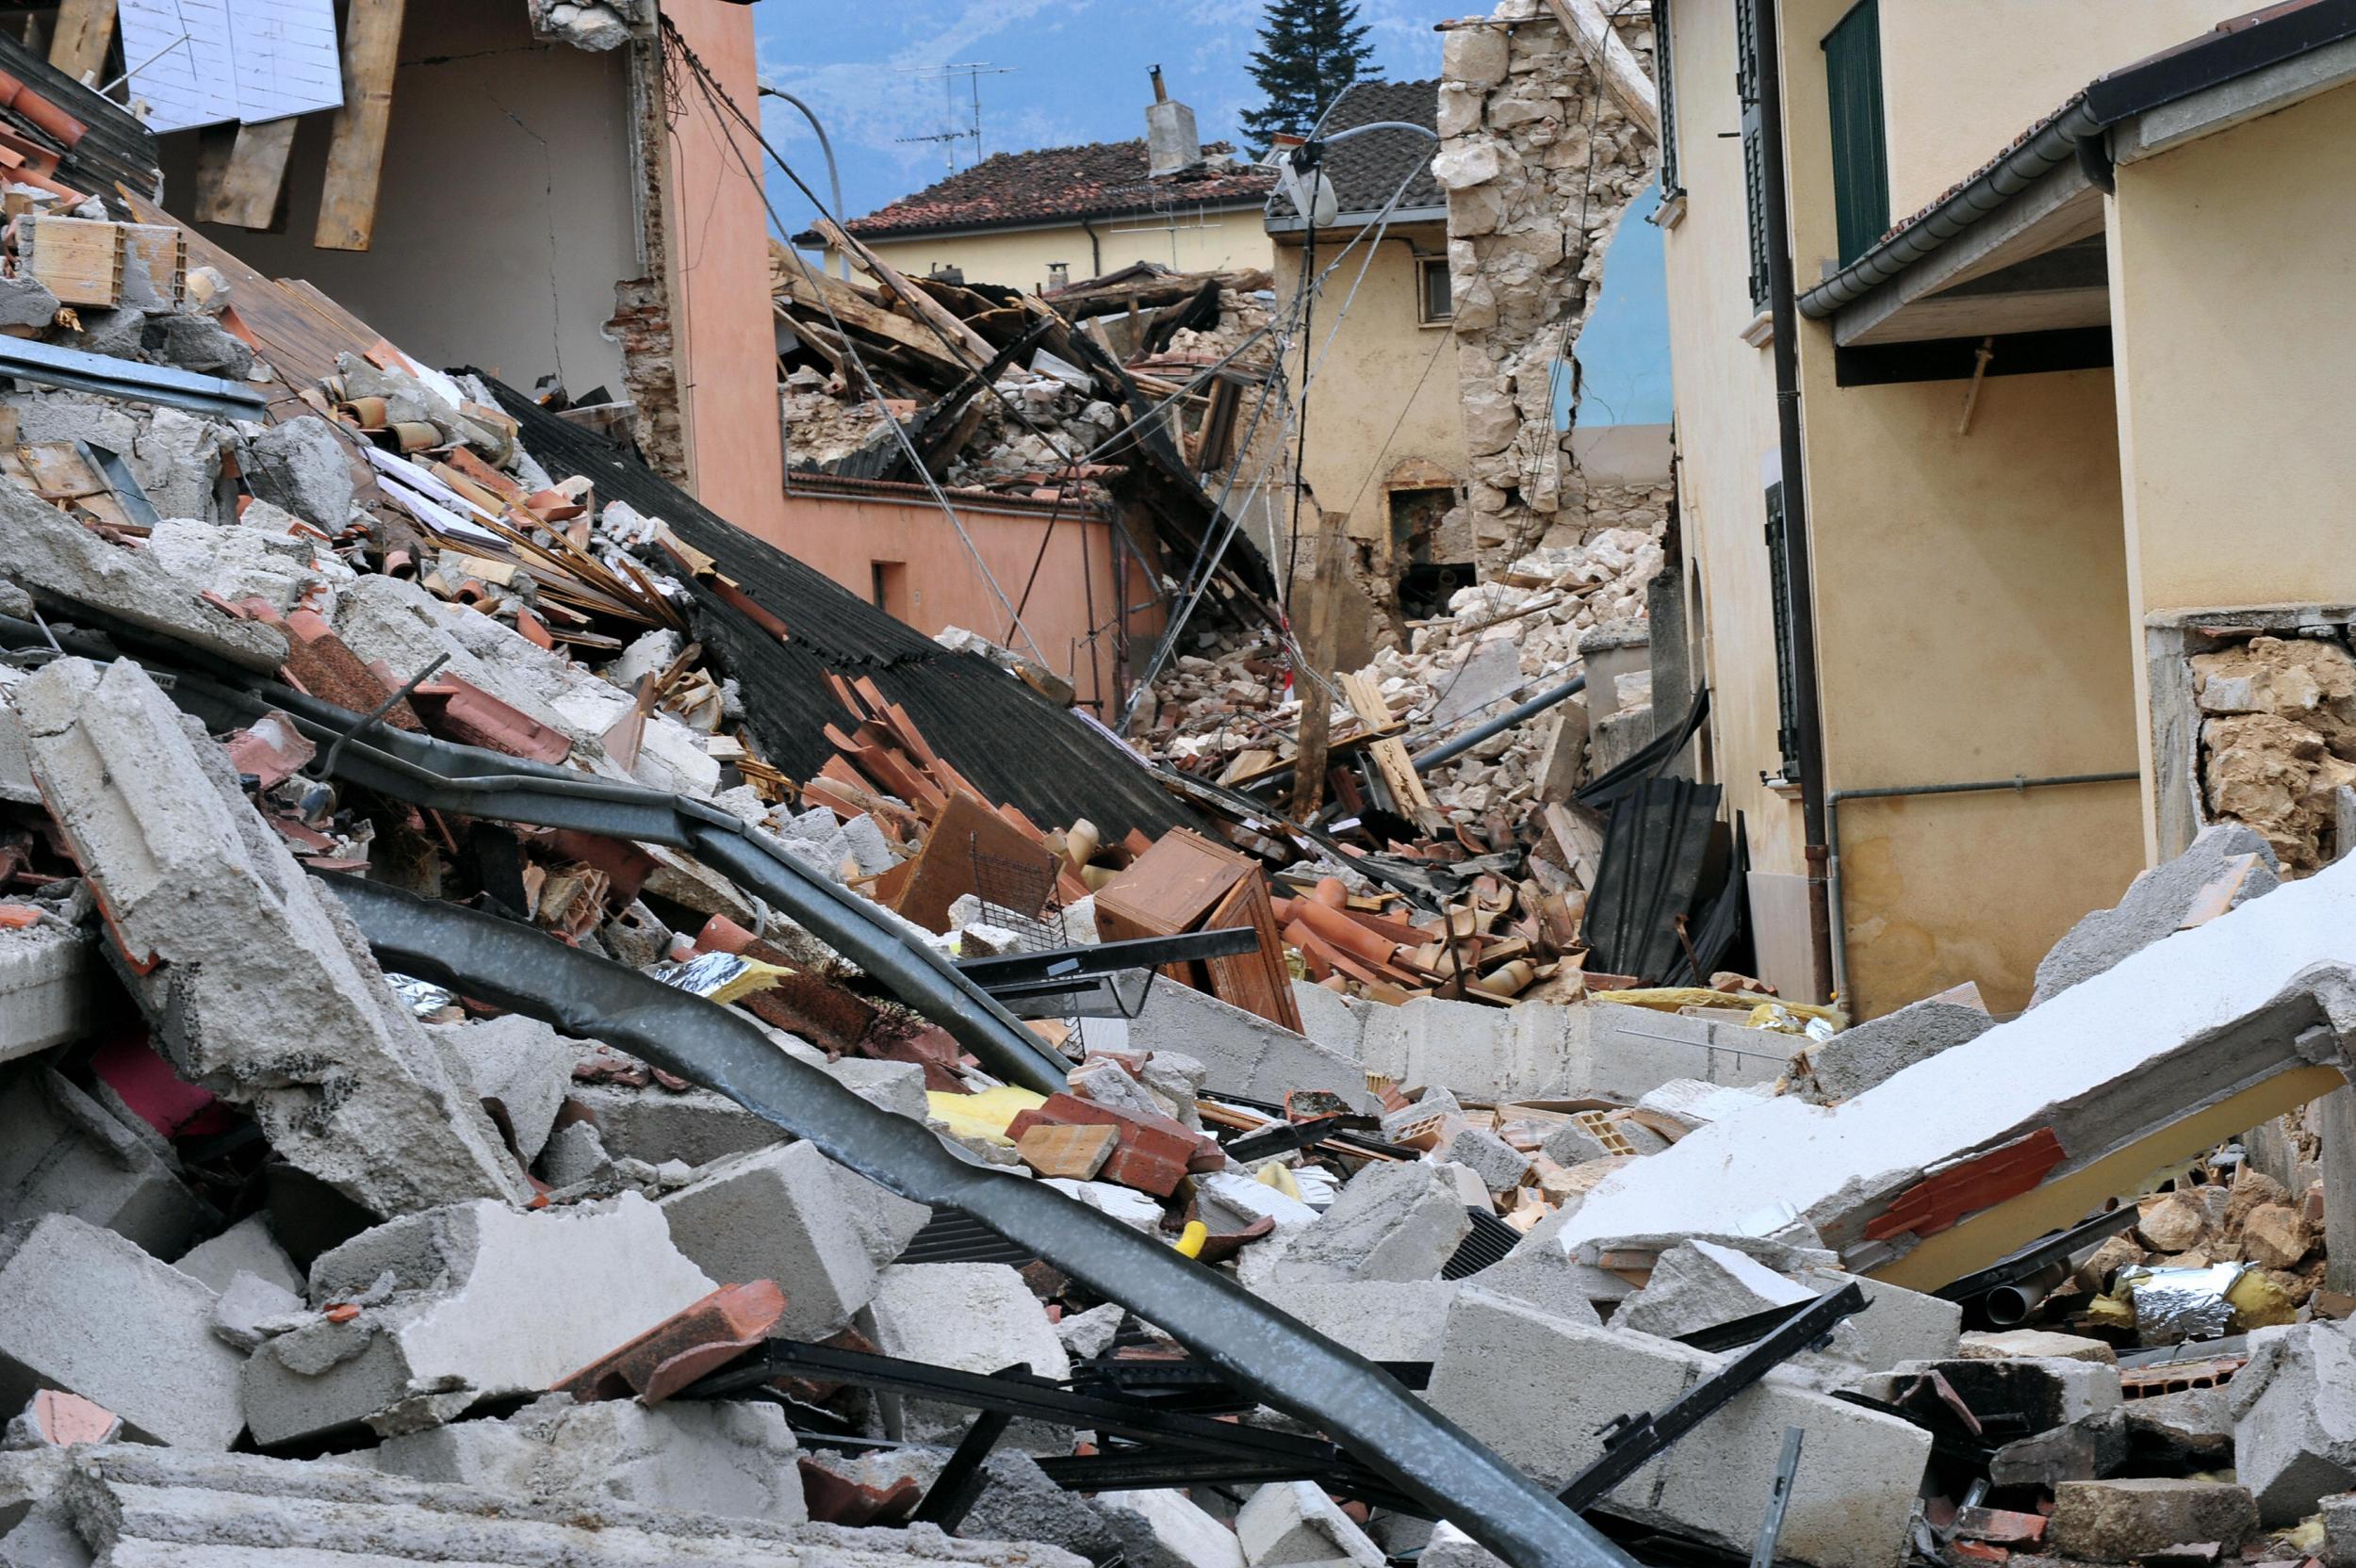 Abruzzo's susceptibility to earthquakes (seen here in 2009) has shaken its tourist income